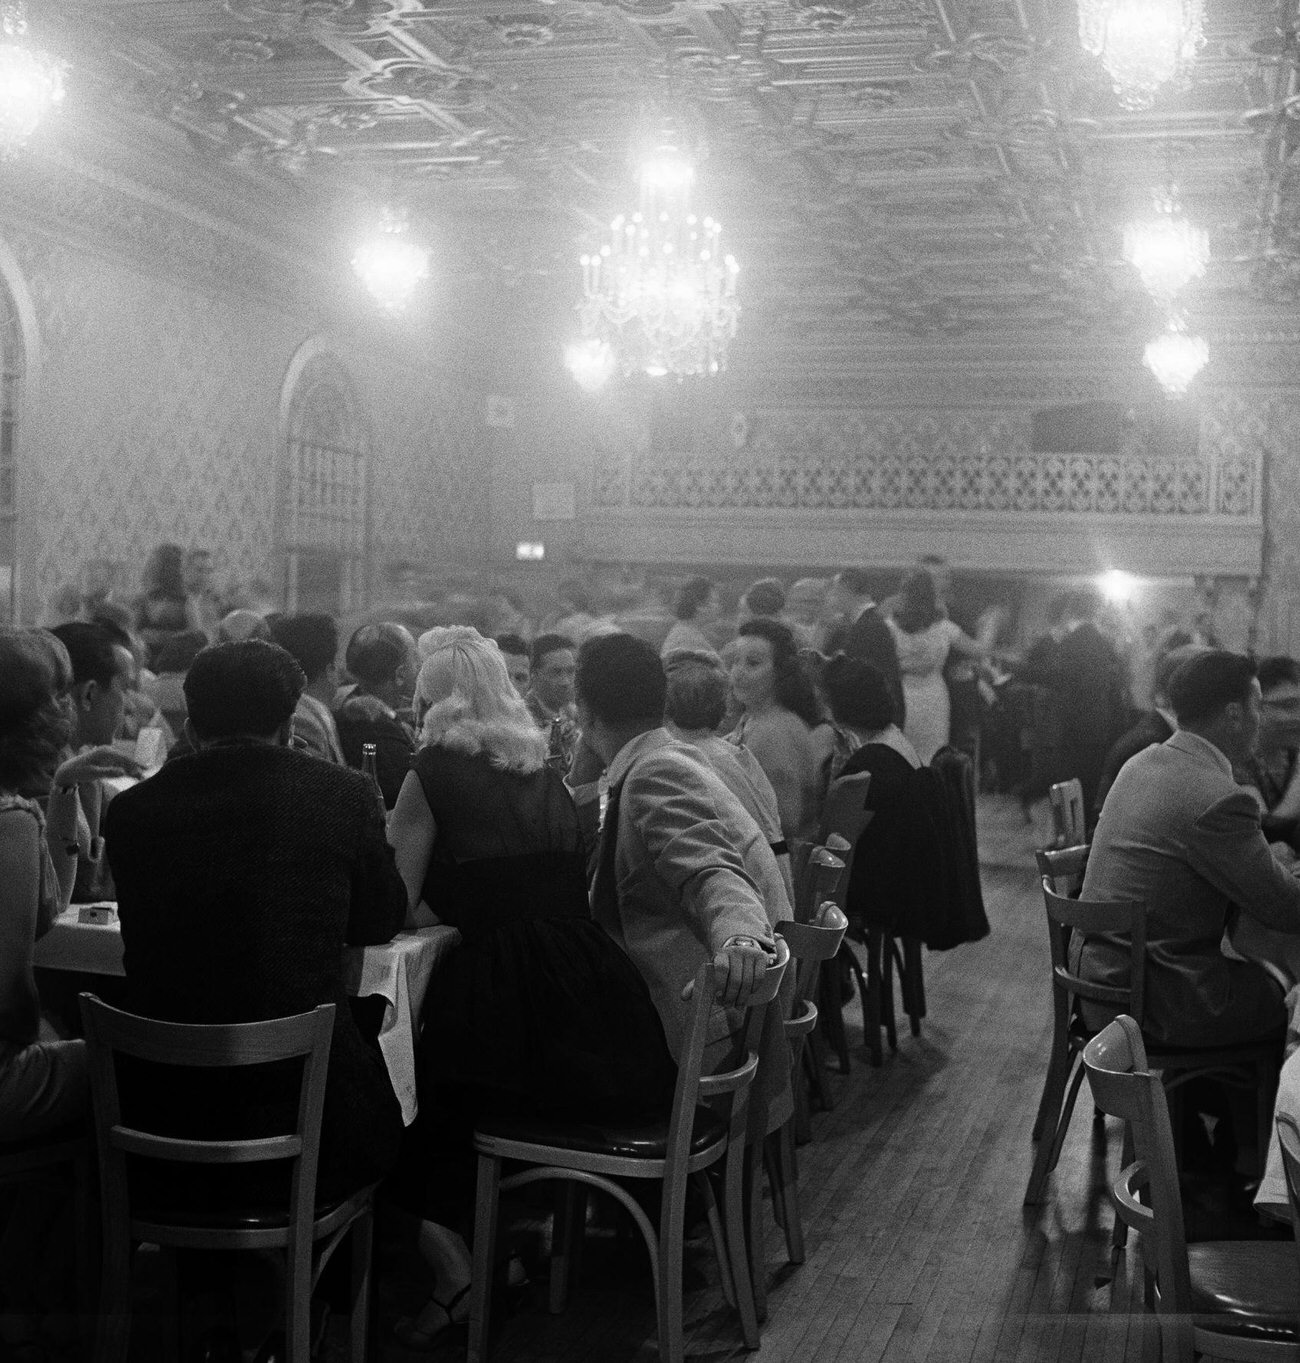 Patrons Dine And Dance At A Nightclub In Brooklyn Heights, 1958.